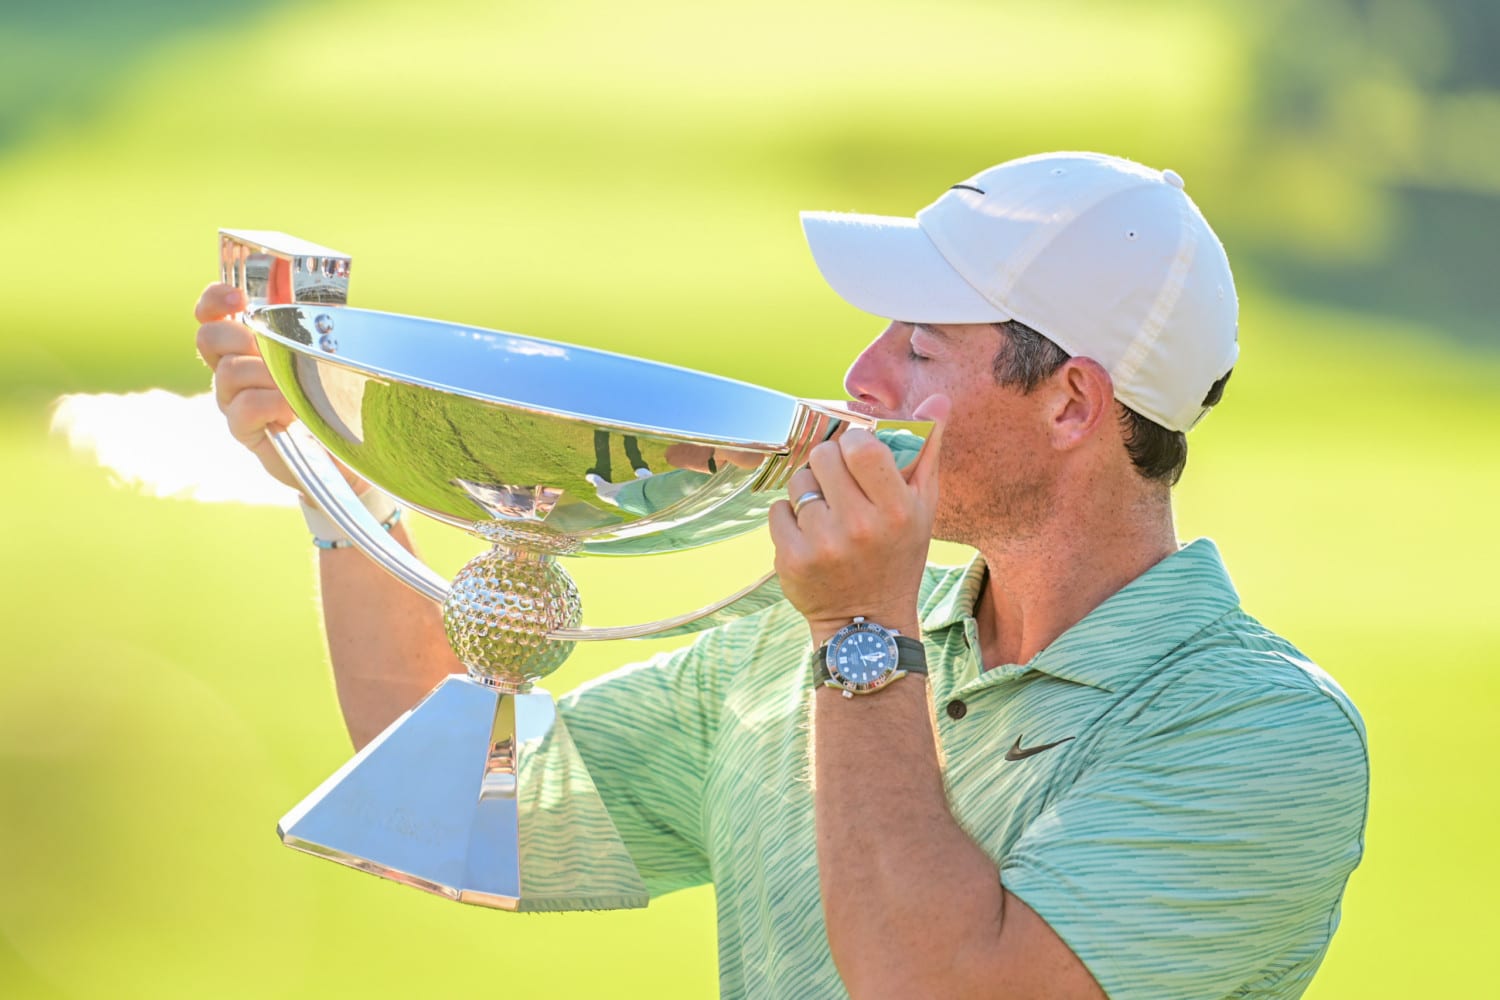 Rory McIlroy Claims Record $18M Prize for FedEx Cup